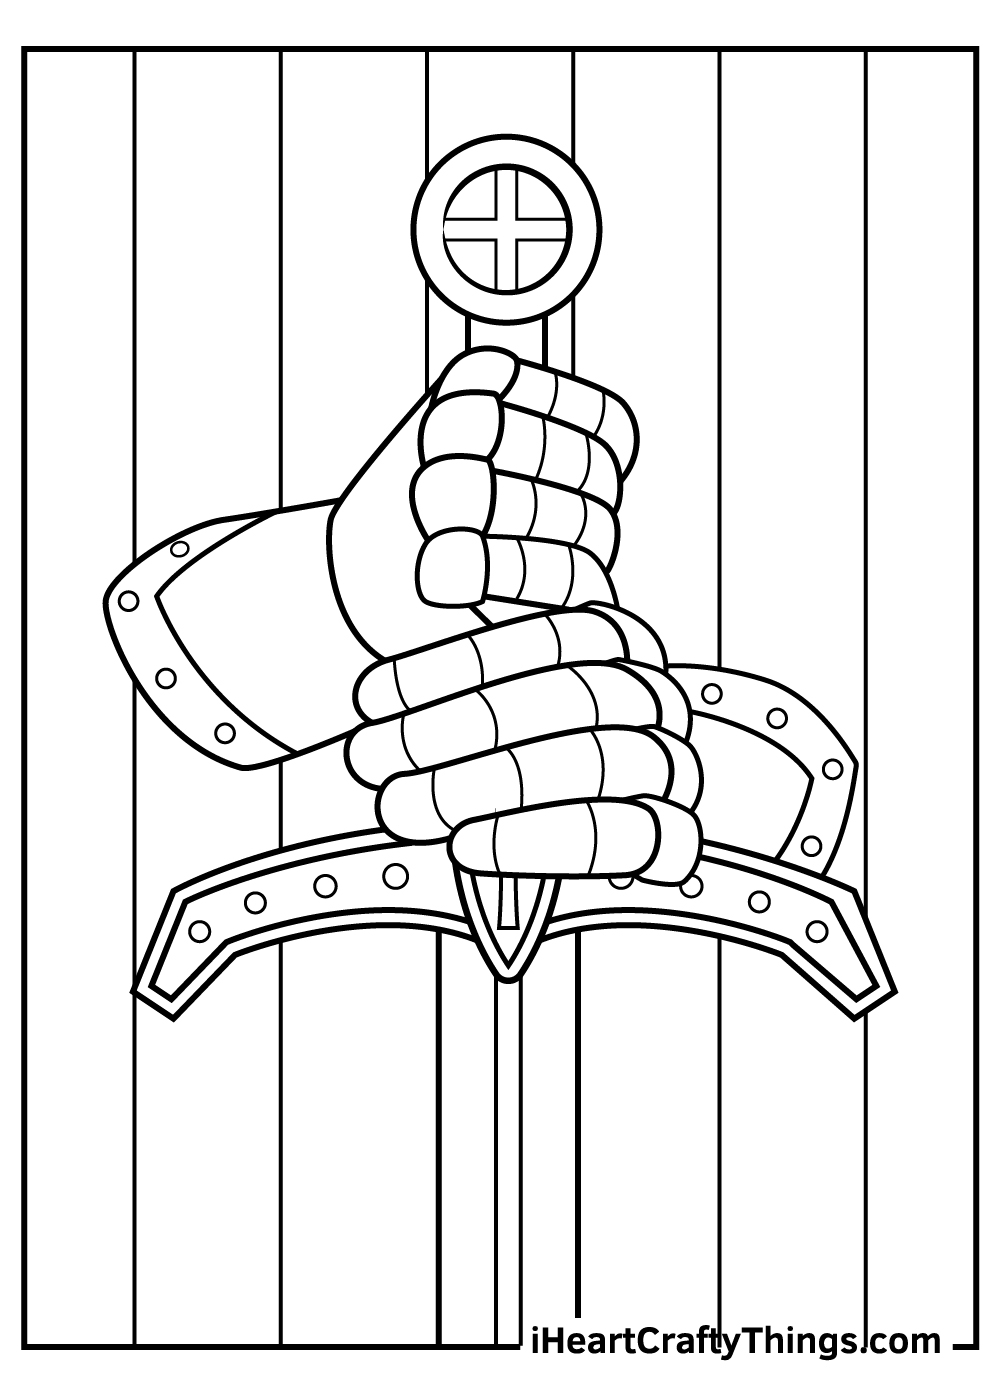 knight sword coloring pages free download